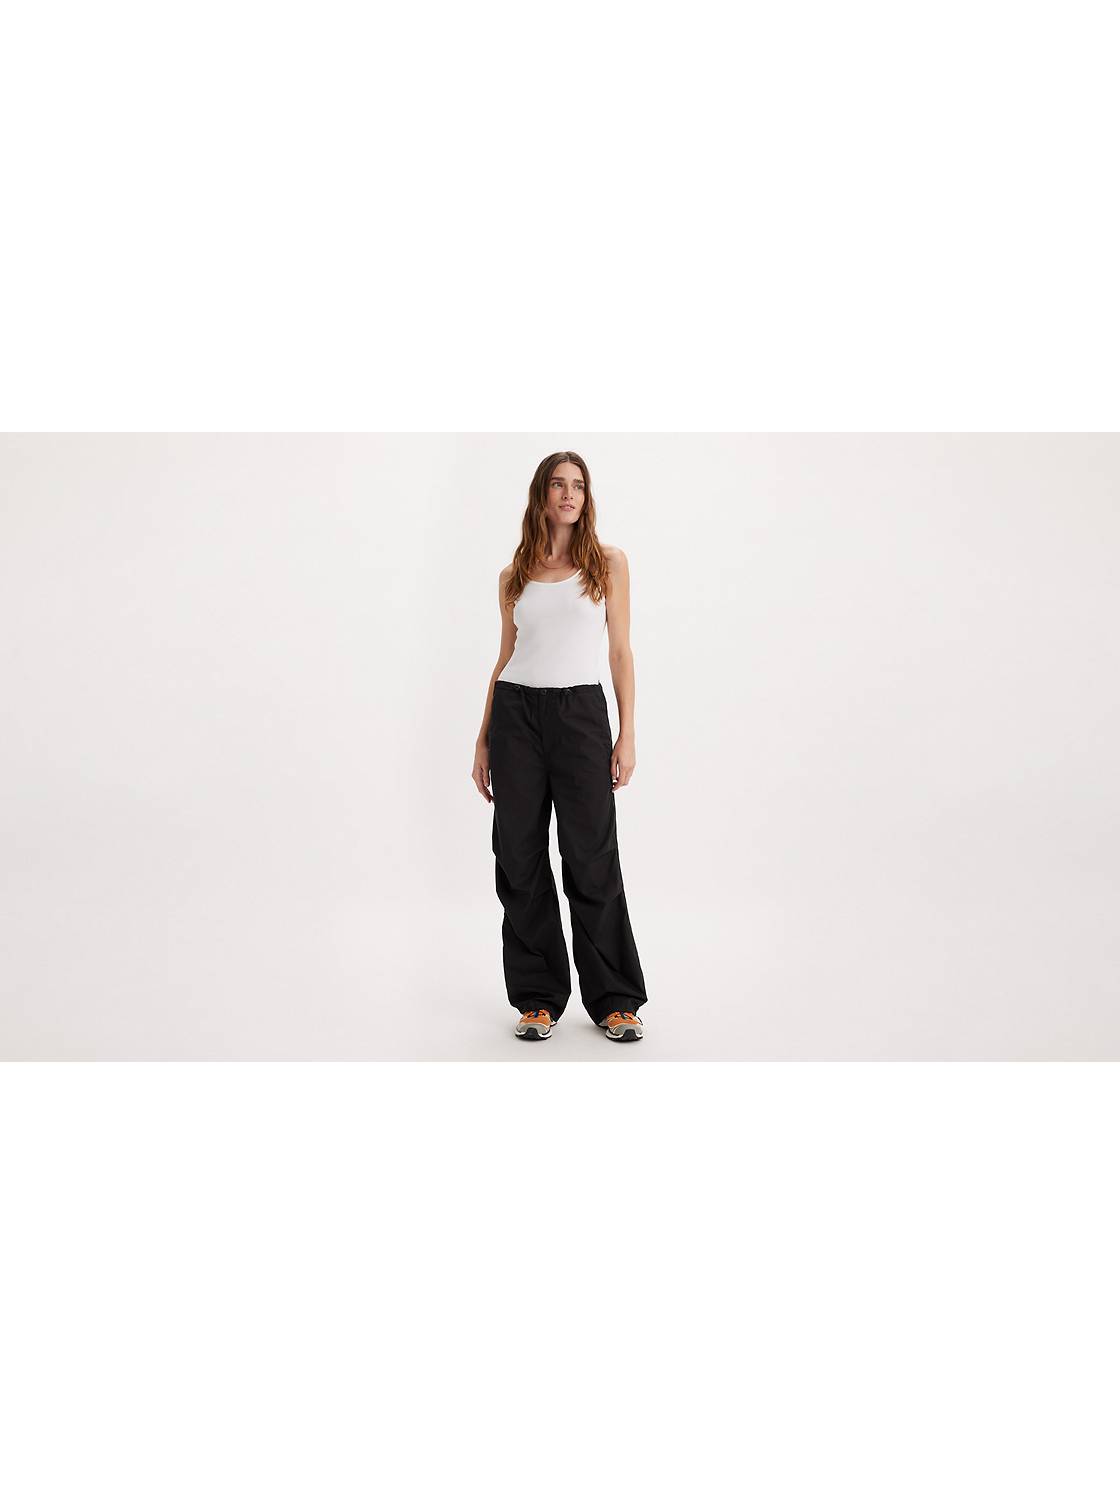 100% Organic Cotton Blue Regular Fit Athleisure Pant for Women at Rs  1299.00, Ladies Cotton Pant